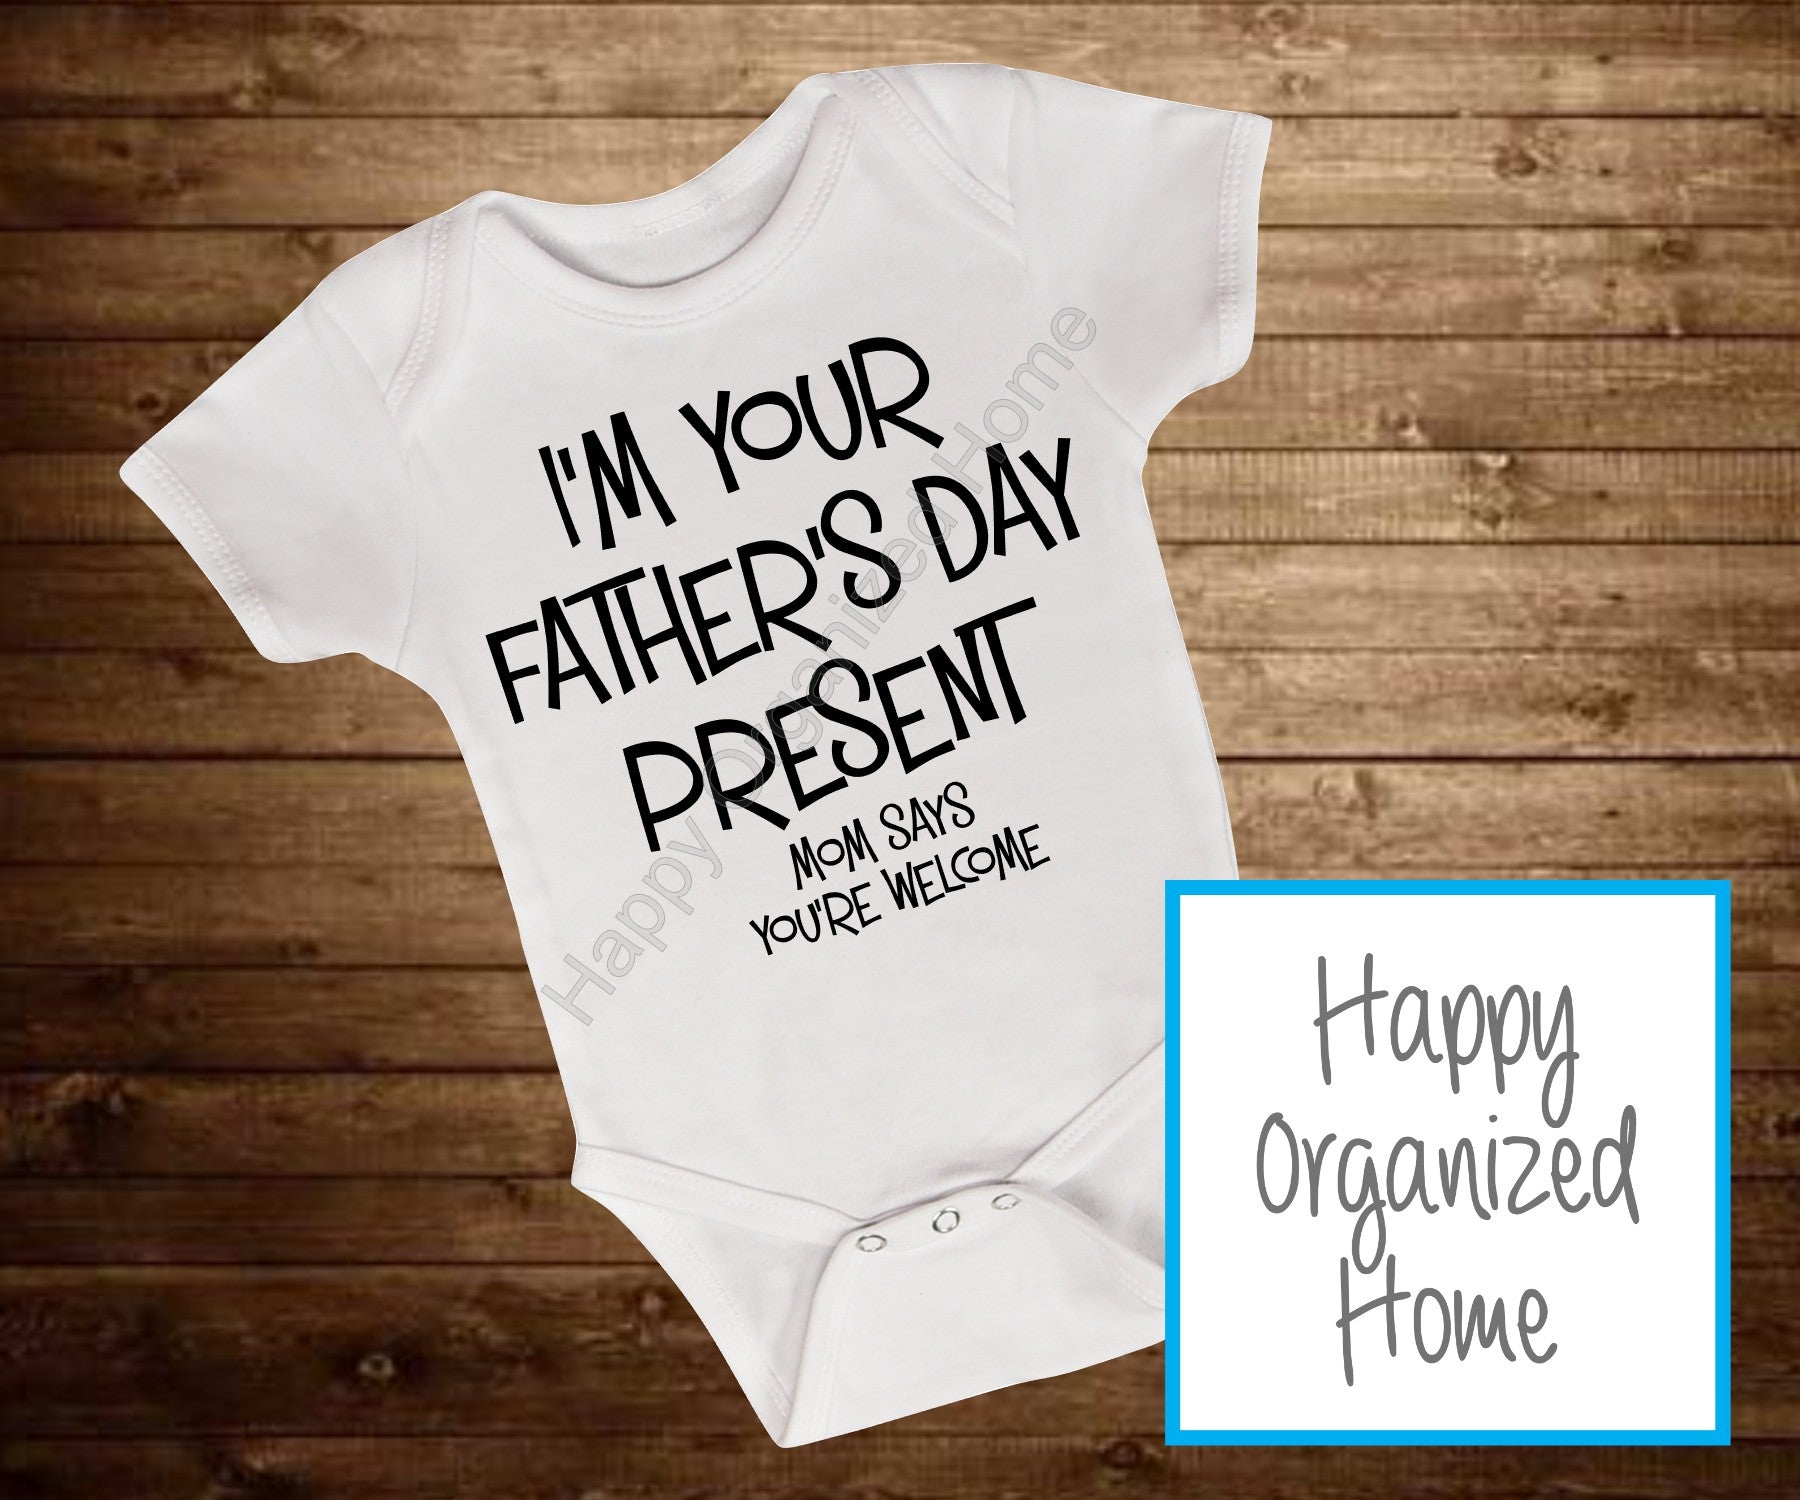 I'm your Father's Day present. Mom say's you're welcome - Onesie